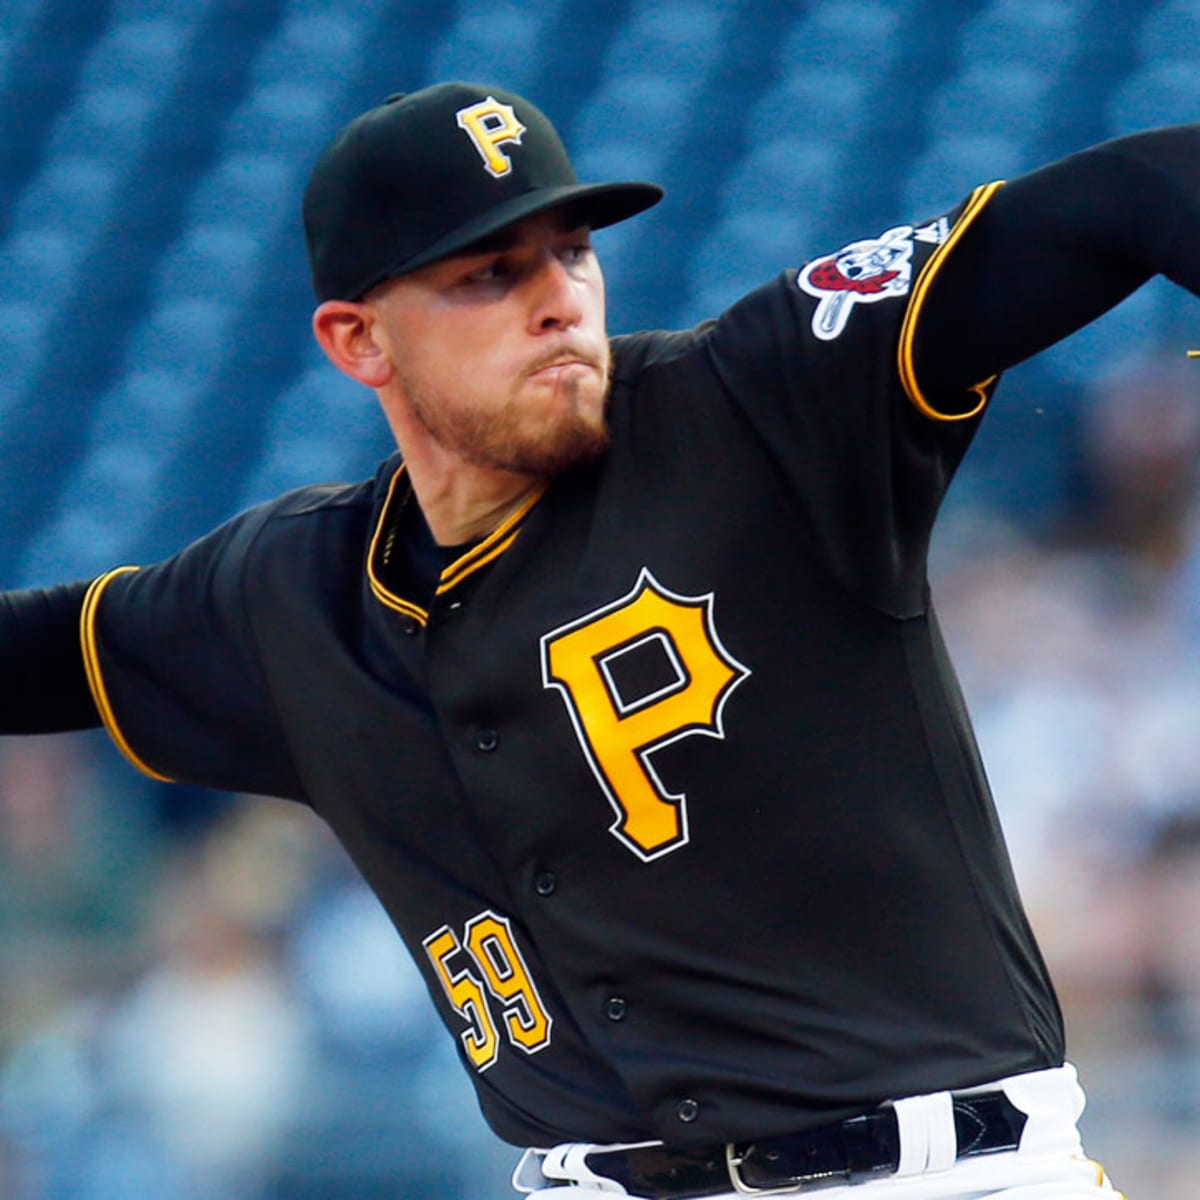 How does Joe Musgrove fit into the Pirates rotation? - Sports Illustrated